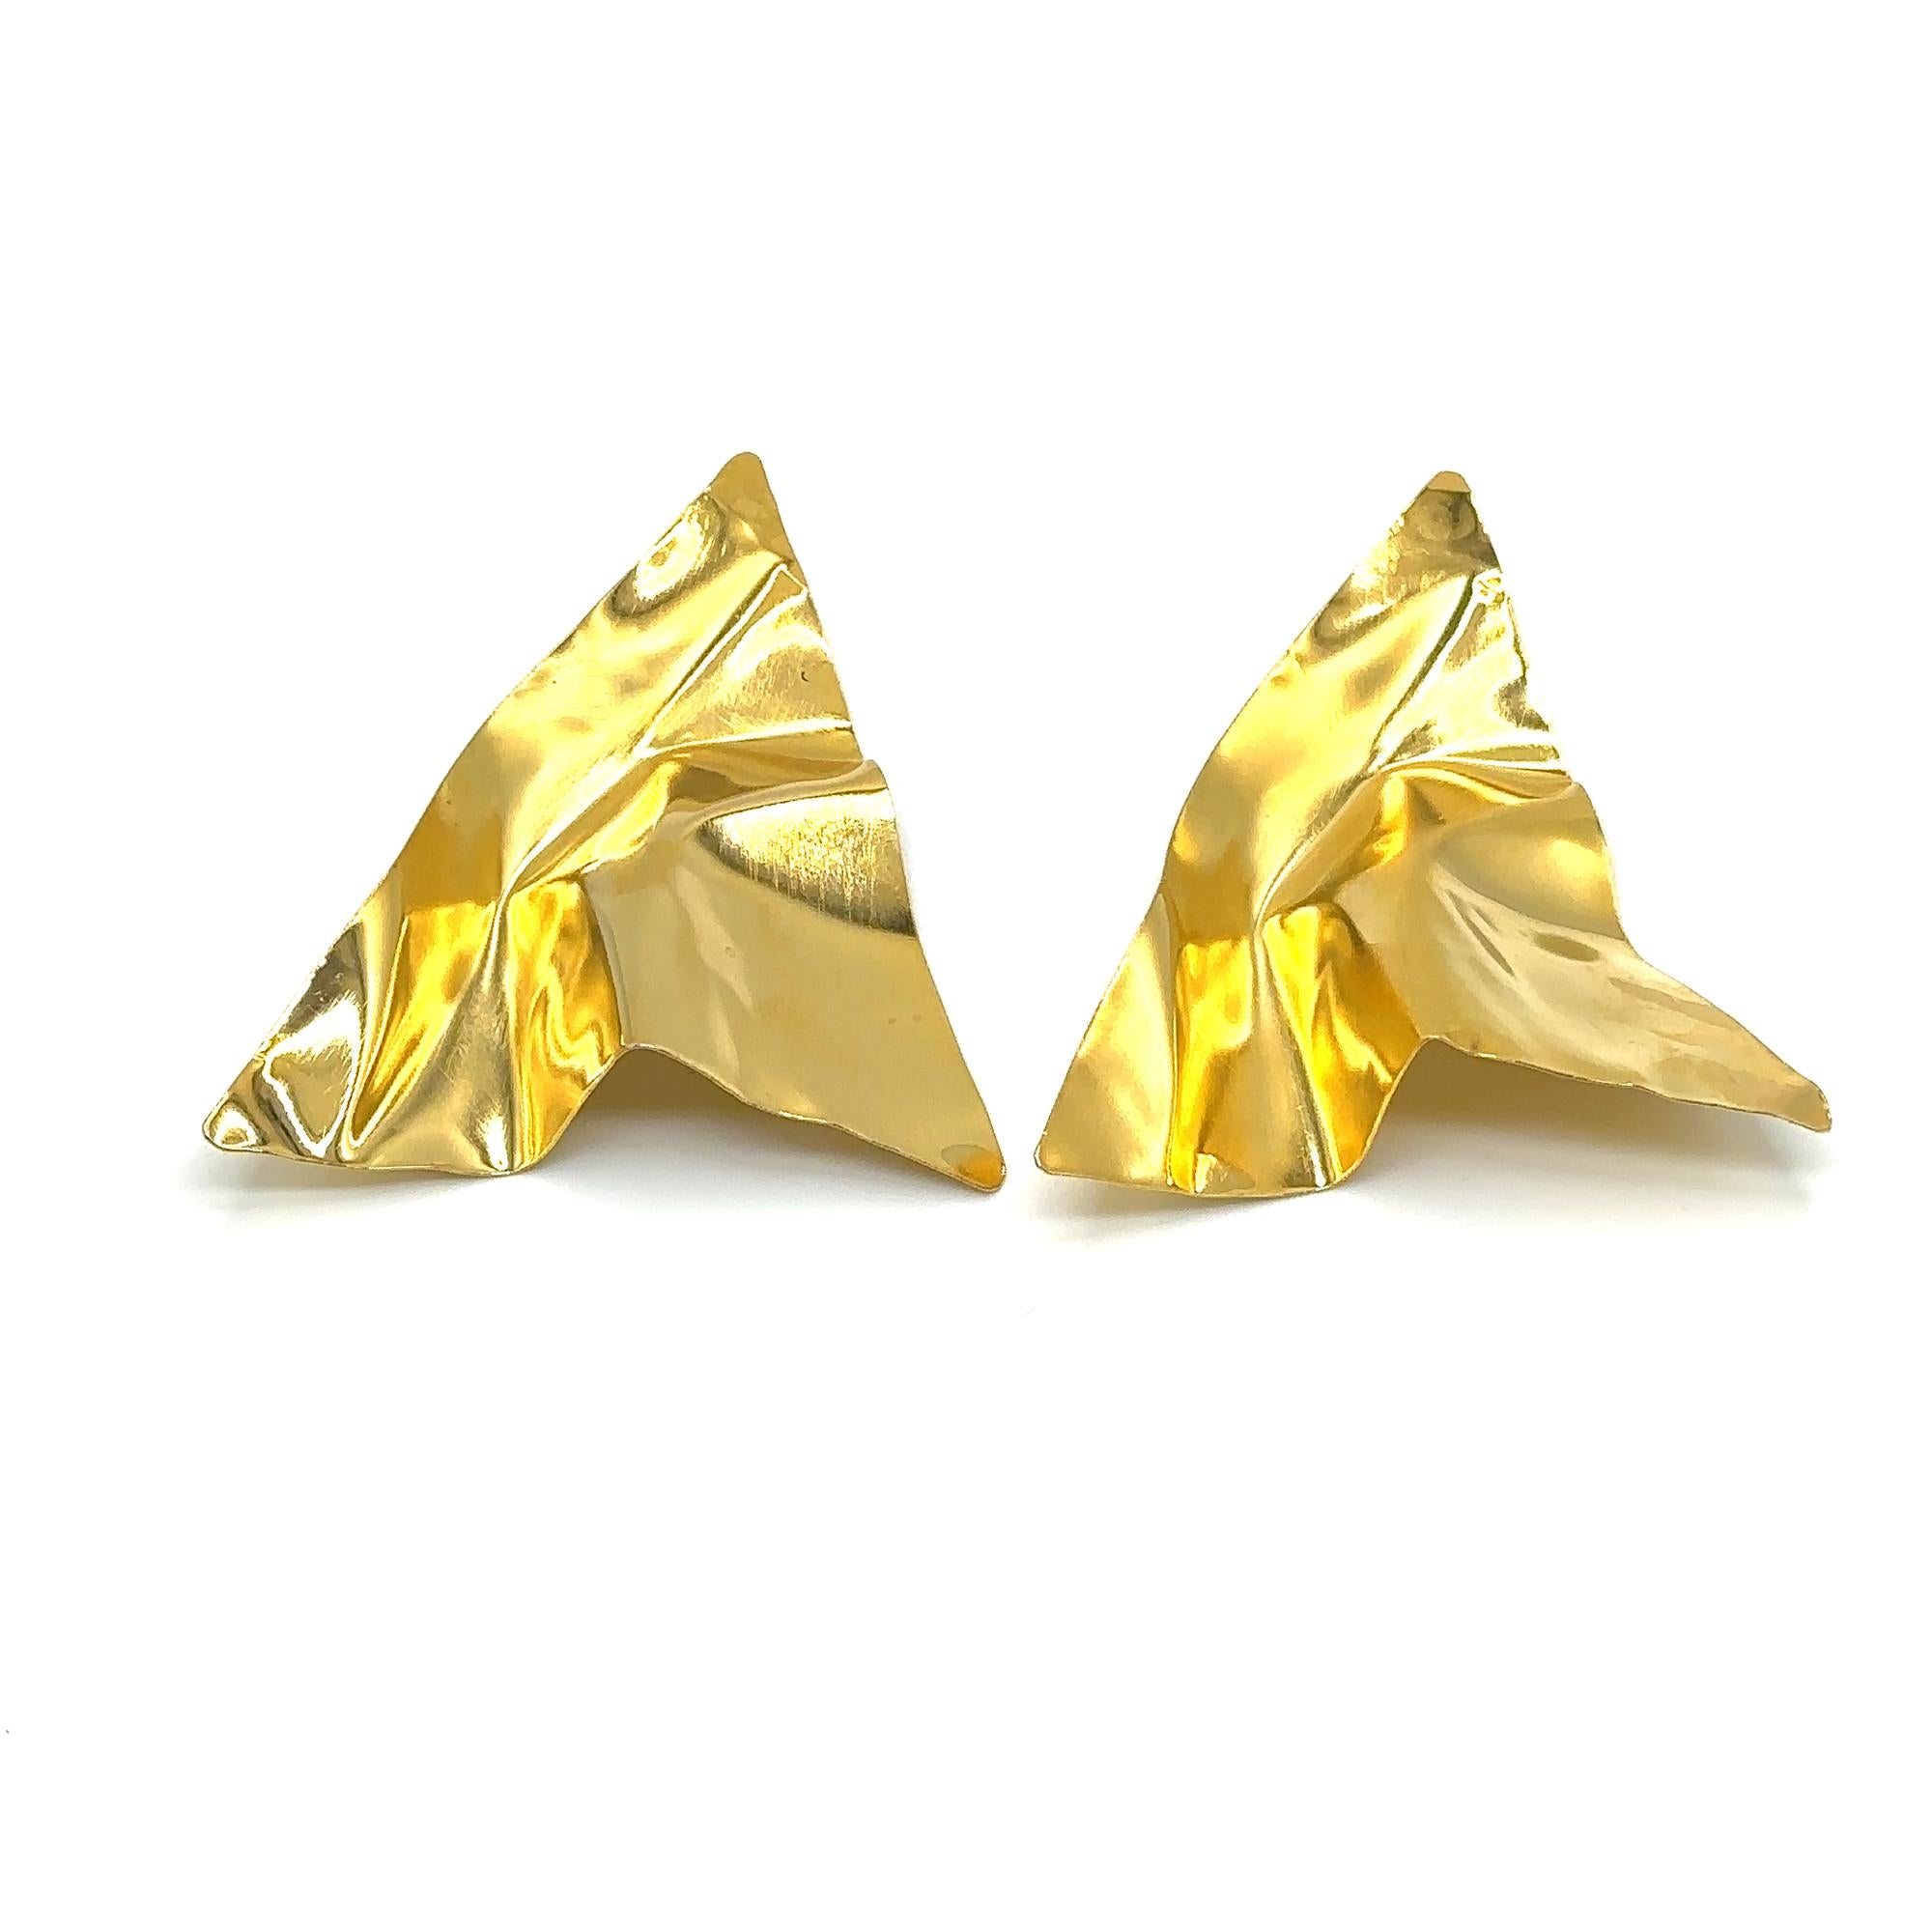 From refined, timeless shapes to modern characters with edge meet JUNE - handcrafted and shape may vary slightly making pieces one of a kind Material 14K Gold Plated

The piece was inspired by Japanese origami. Folding techniques were used.